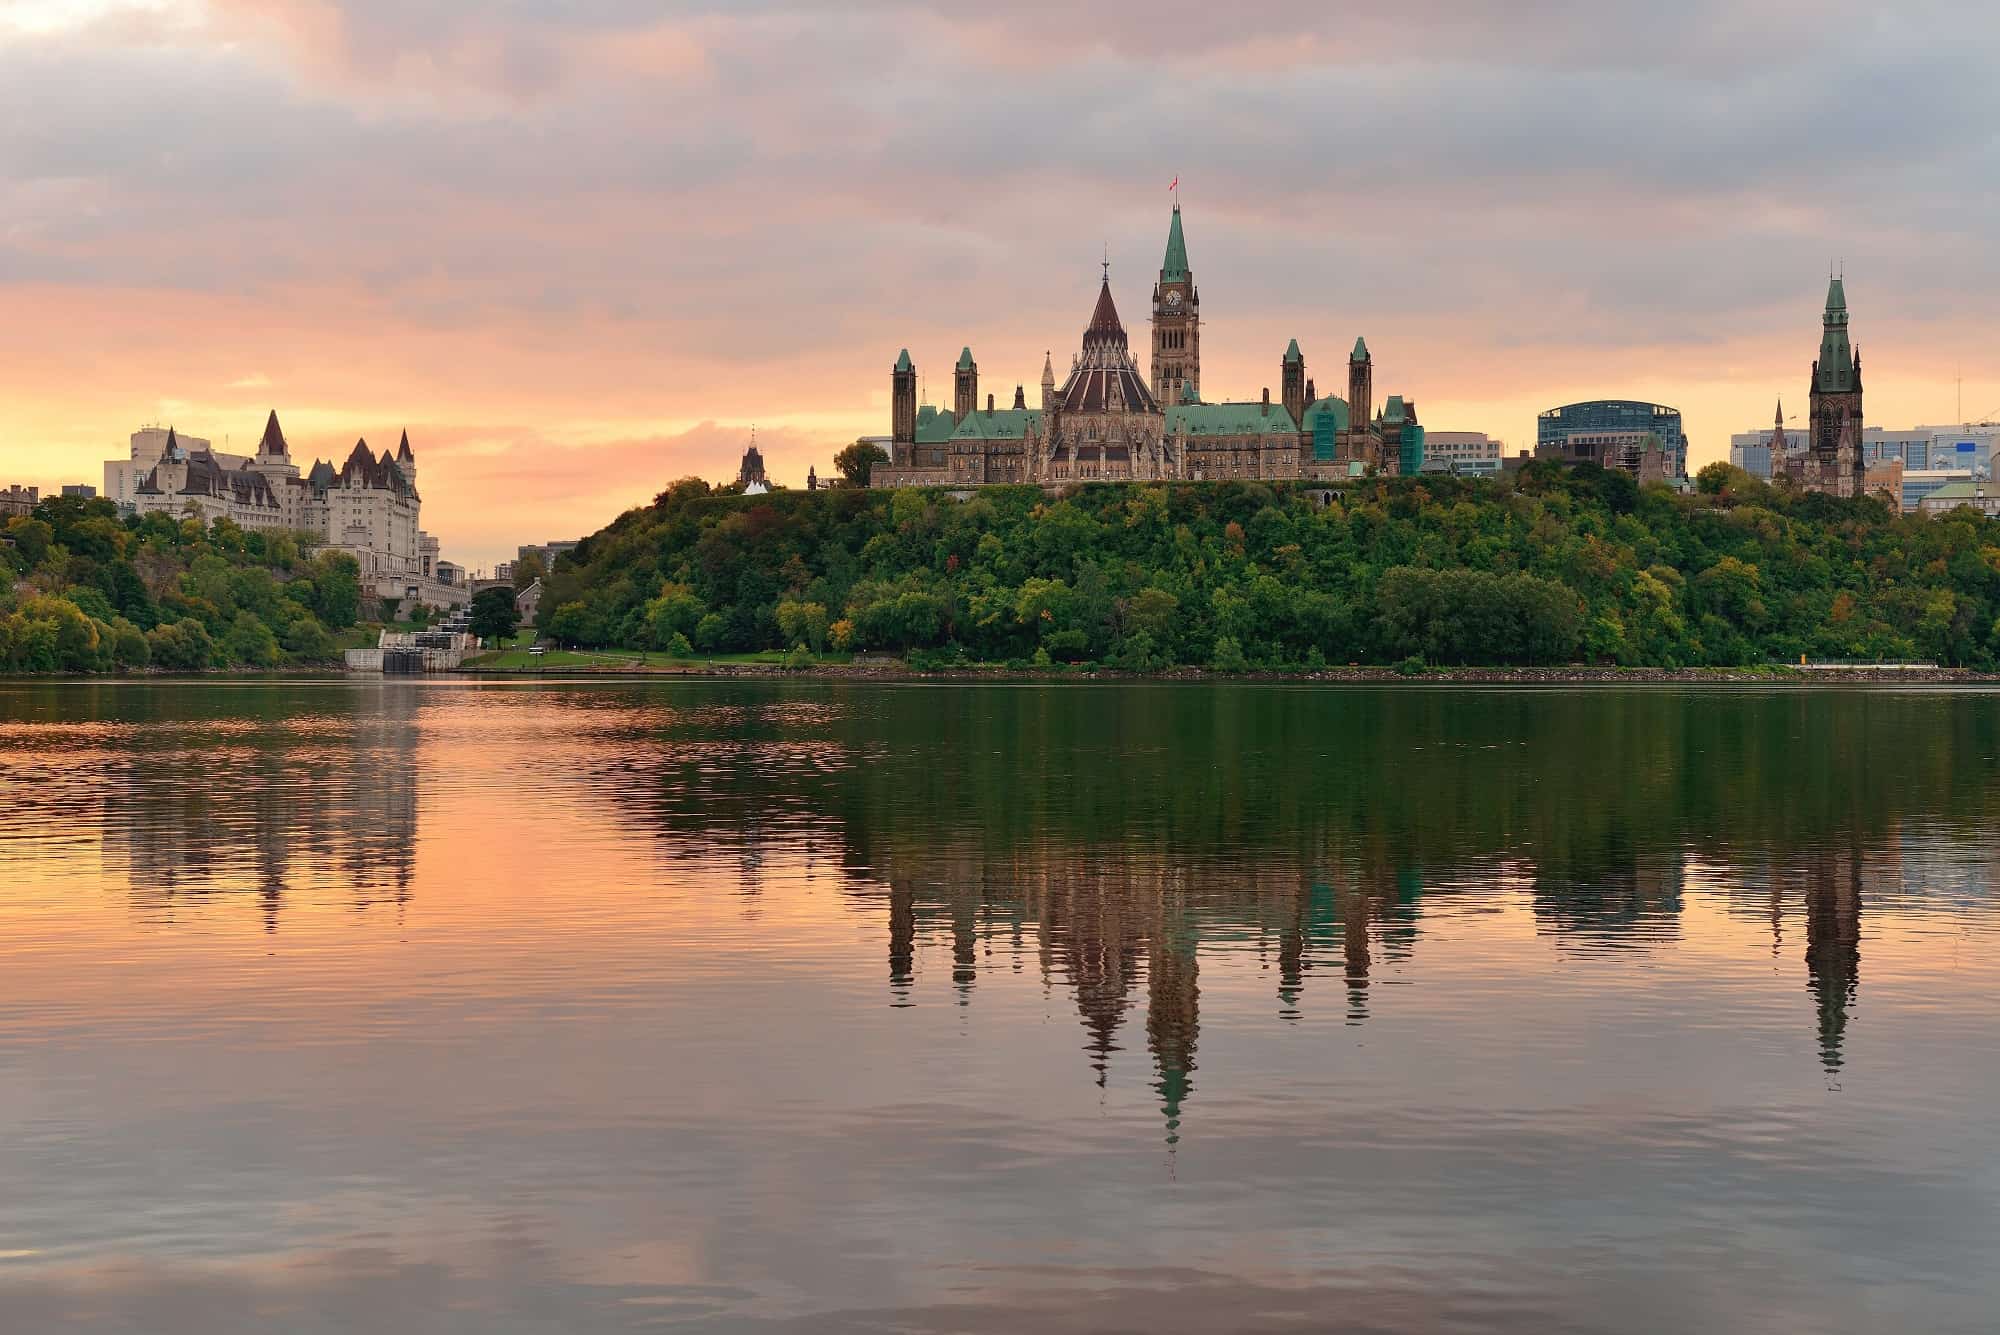 Ottawa Attractions: Top 10 Things For Families To Do while Visiting